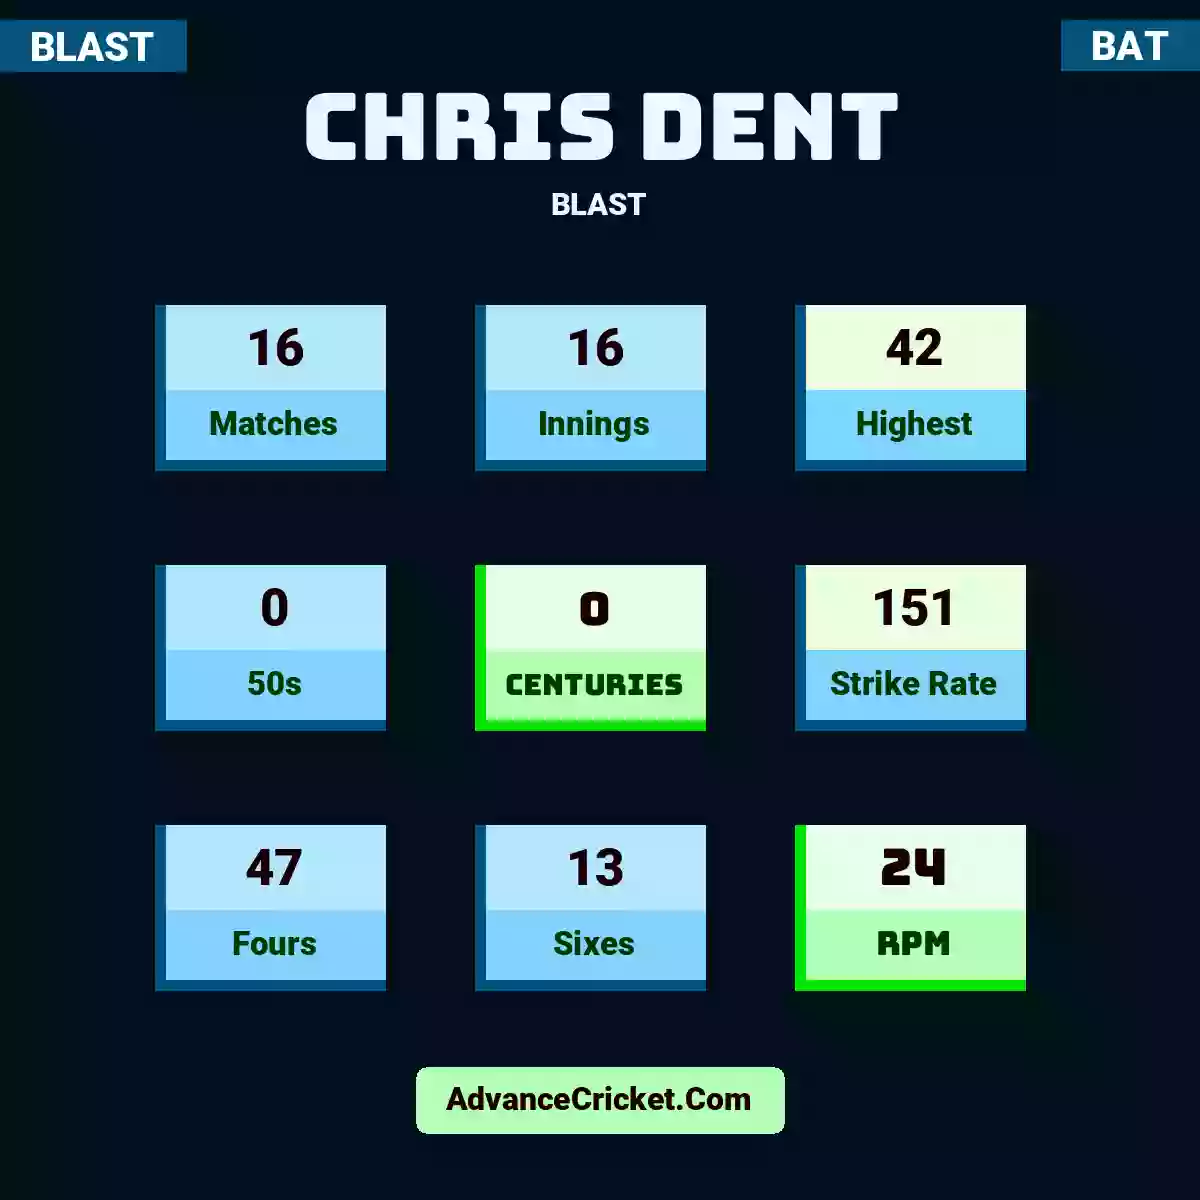 Chris Dent BLAST , Chris Dent played 16 matches, scored 42 runs as highest, 0 half-centuries, and 0 centuries, with a strike rate of 151. C.Dent hit 47 fours and 13 sixes, with an RPM of 24.